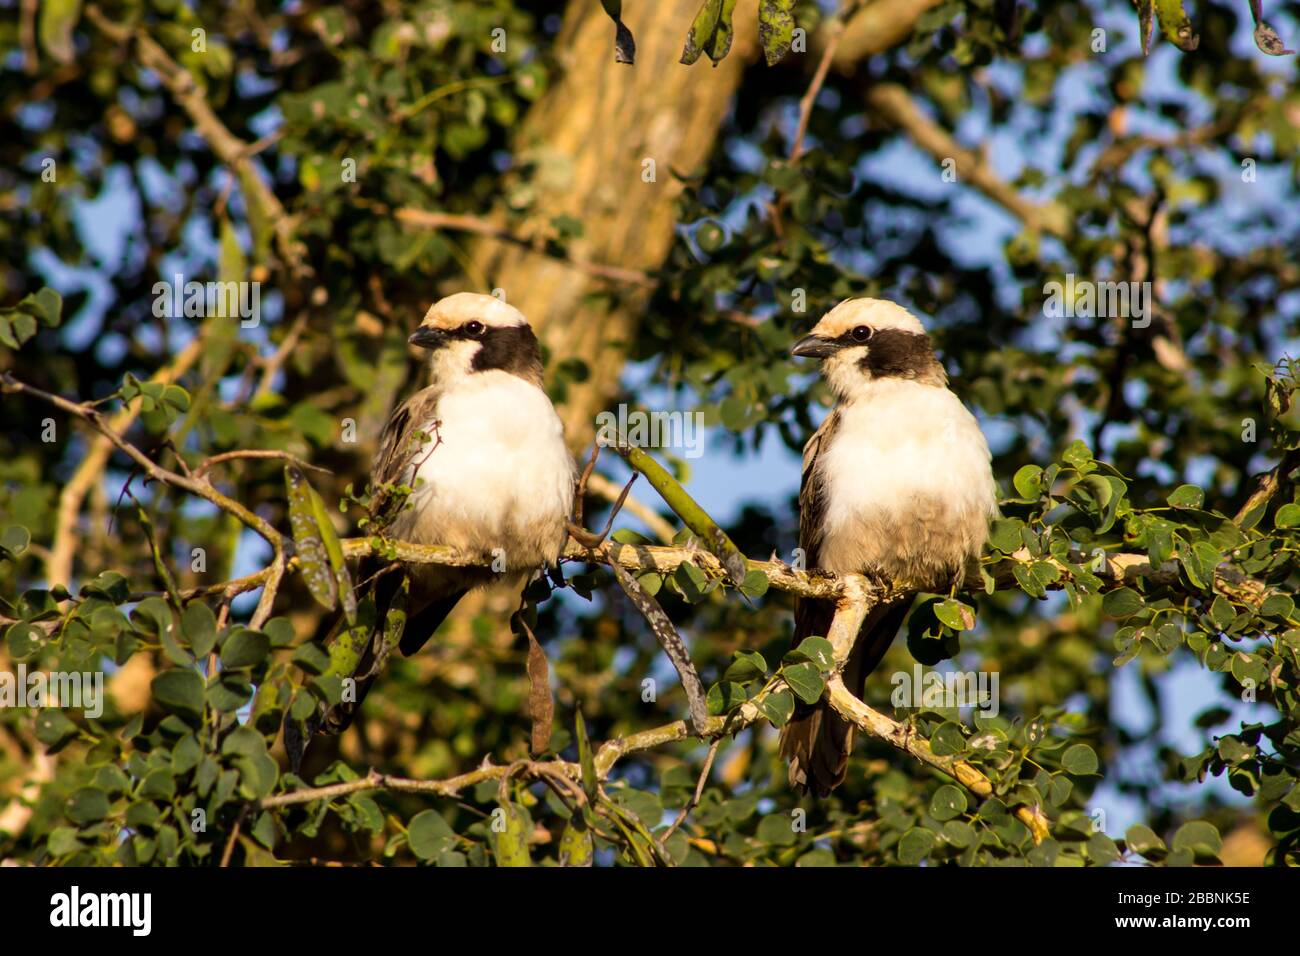 Two Southern white-crowned shrikes (Eurocephalus anguitimens) perched in a thorn tree, both looking towards the left, in the Kruger National Park Stock Photo